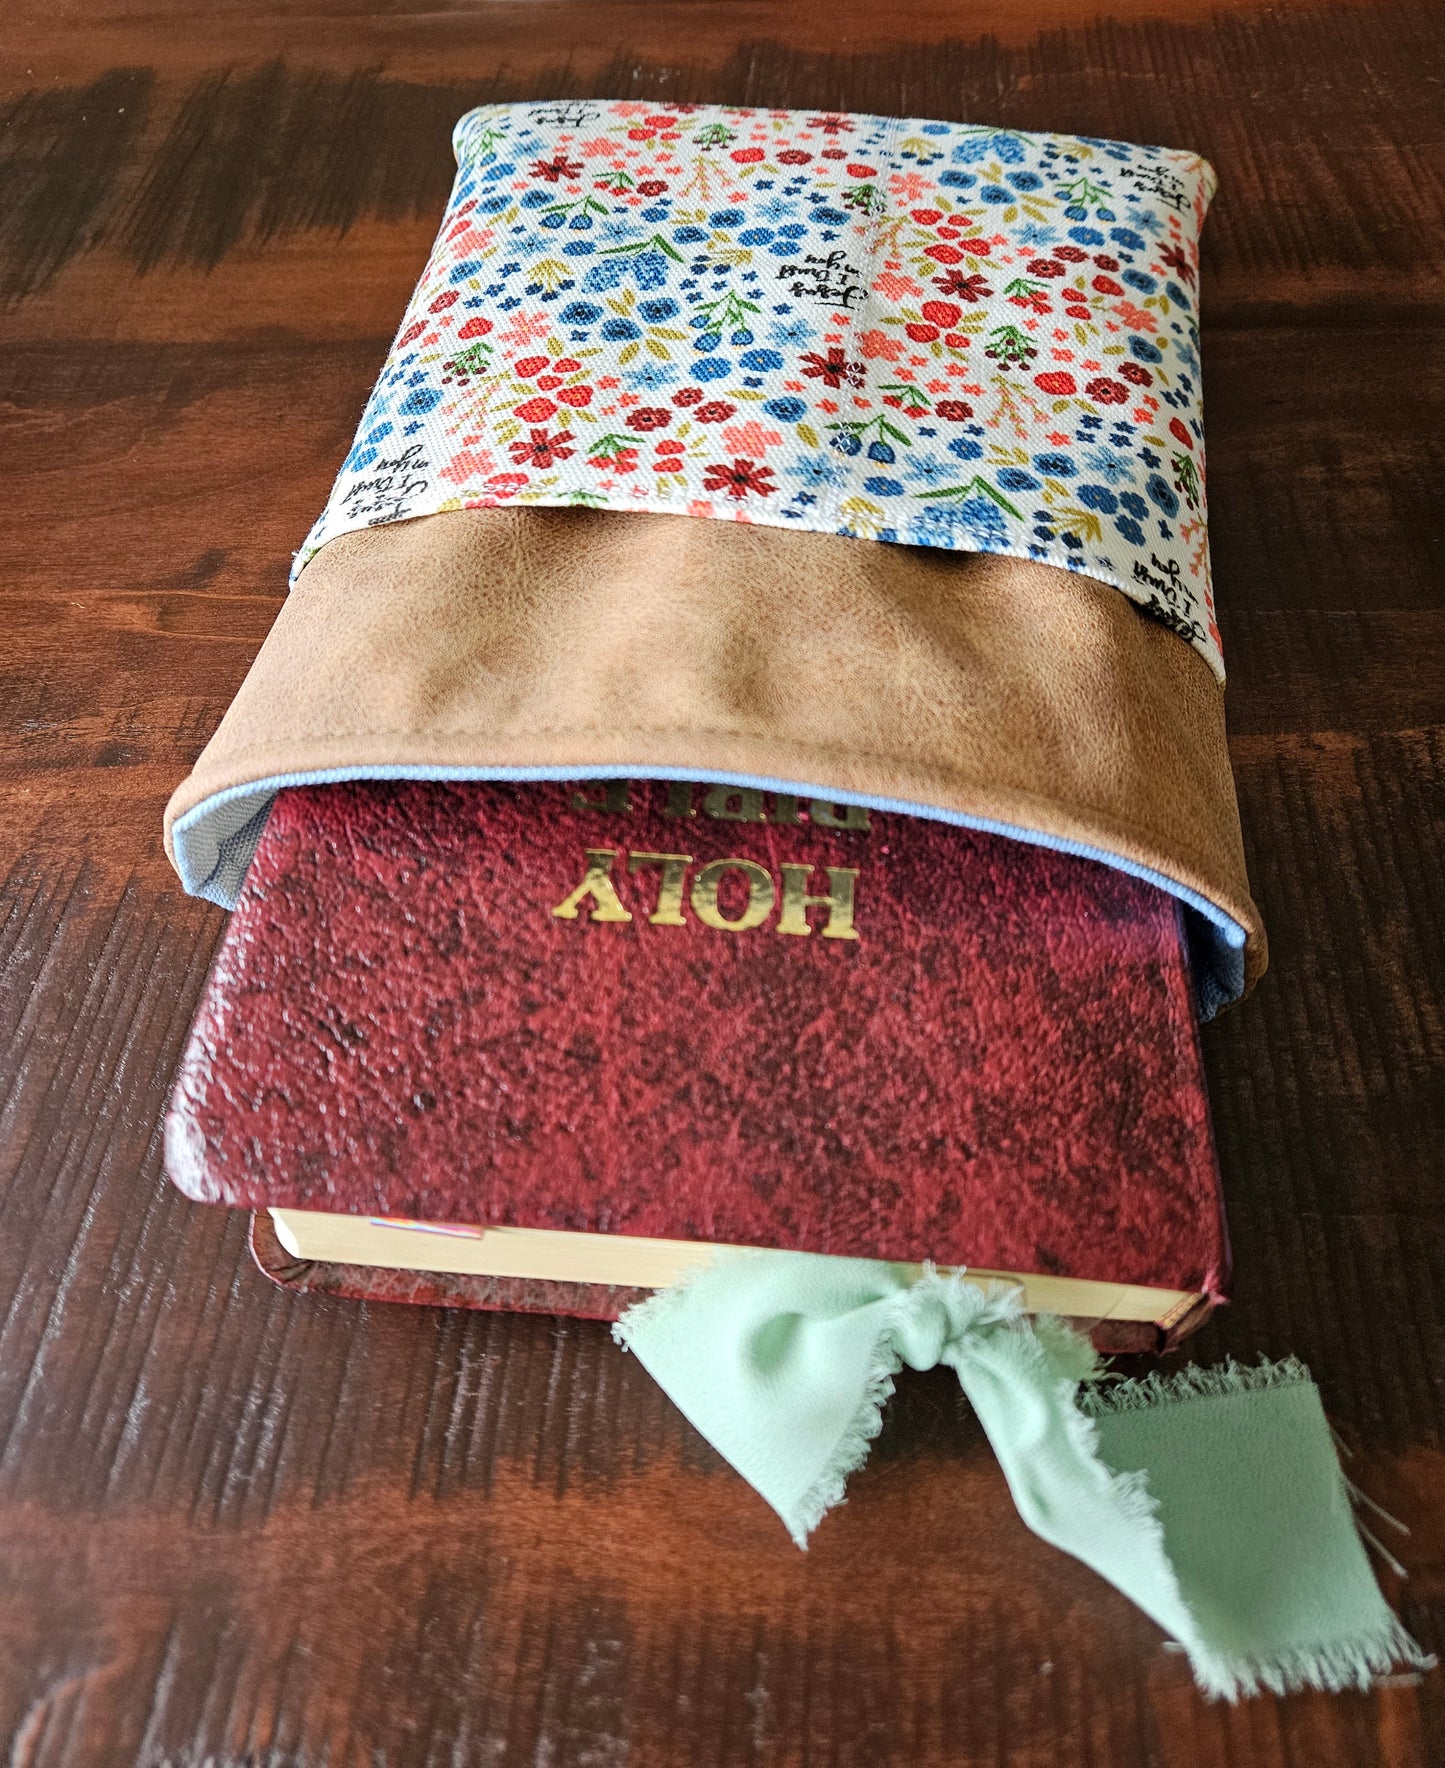 Book Sleeve Eucharist and Chalice Catholic fabric for Journal Bibles Planners or Device case